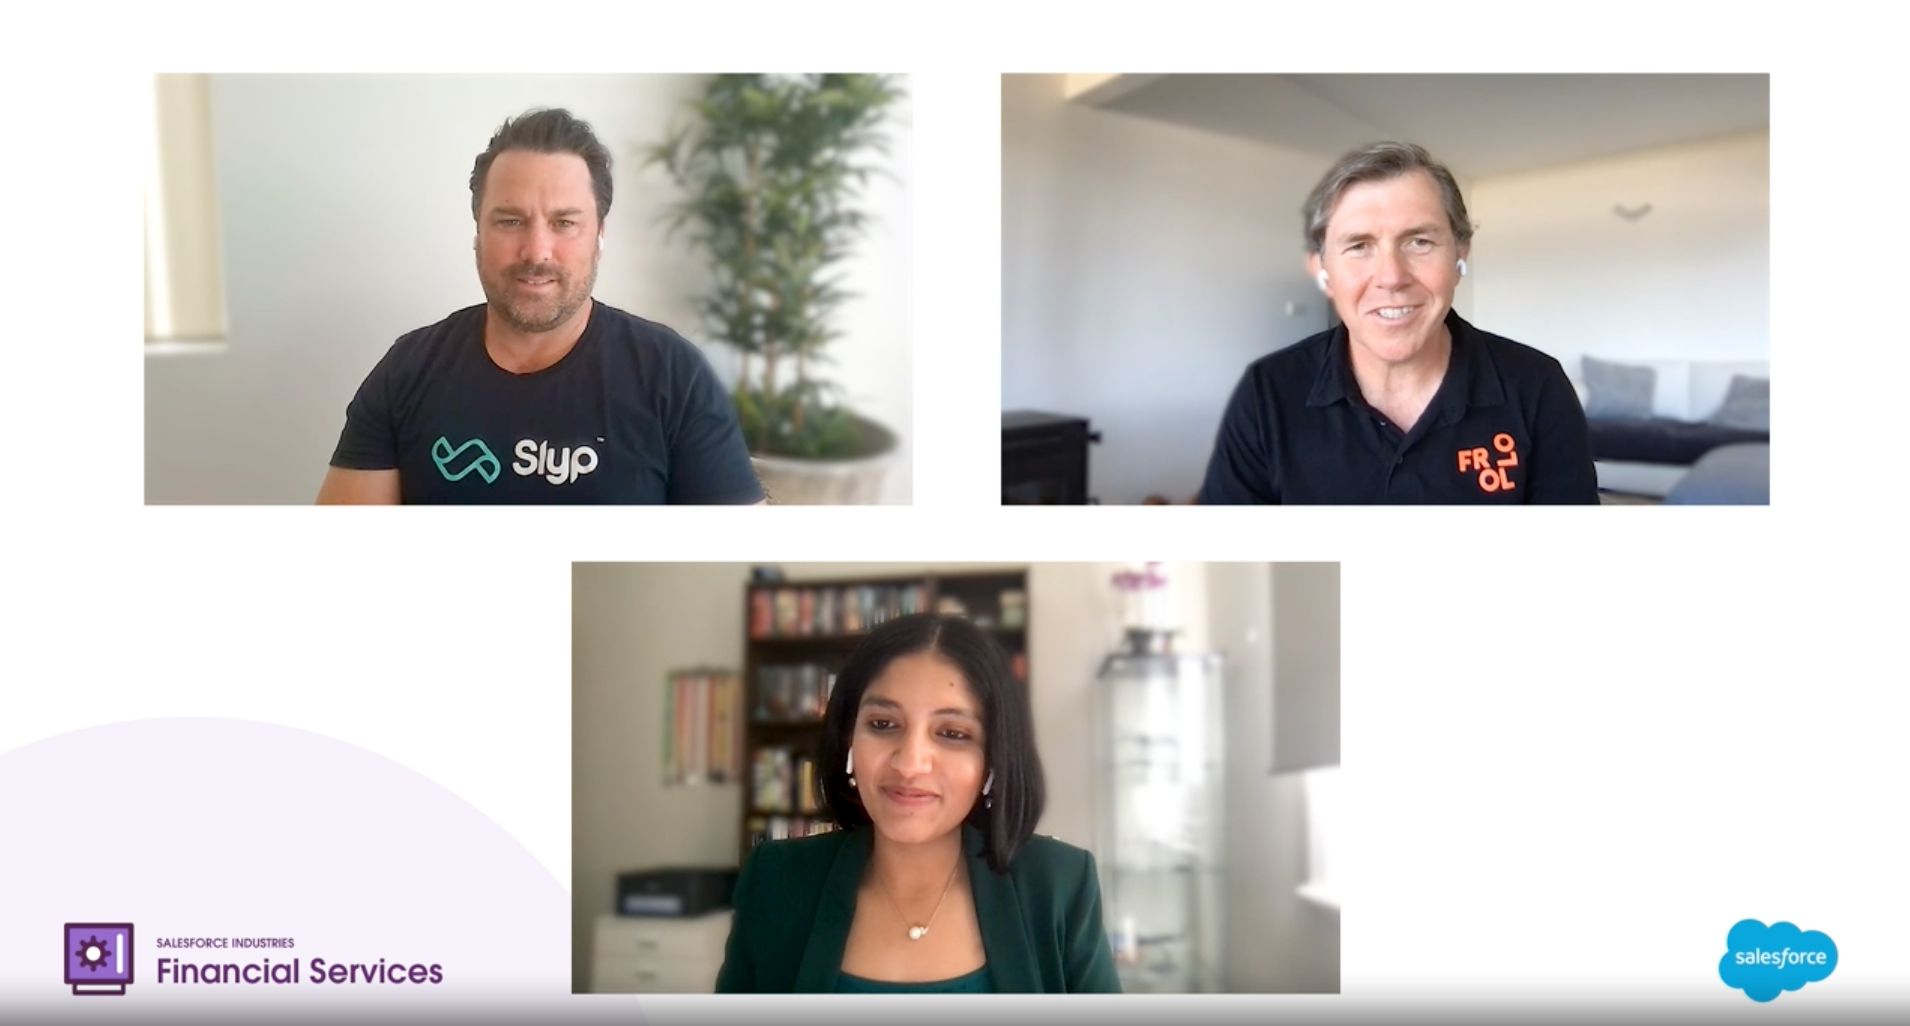 Paul Weingarth, CEO & Co-Founder Slyp, Gareth Gumbley, Founder and CEO Frollo, and Shreya Sethi, Director, Business Value & Strategy Salesforce